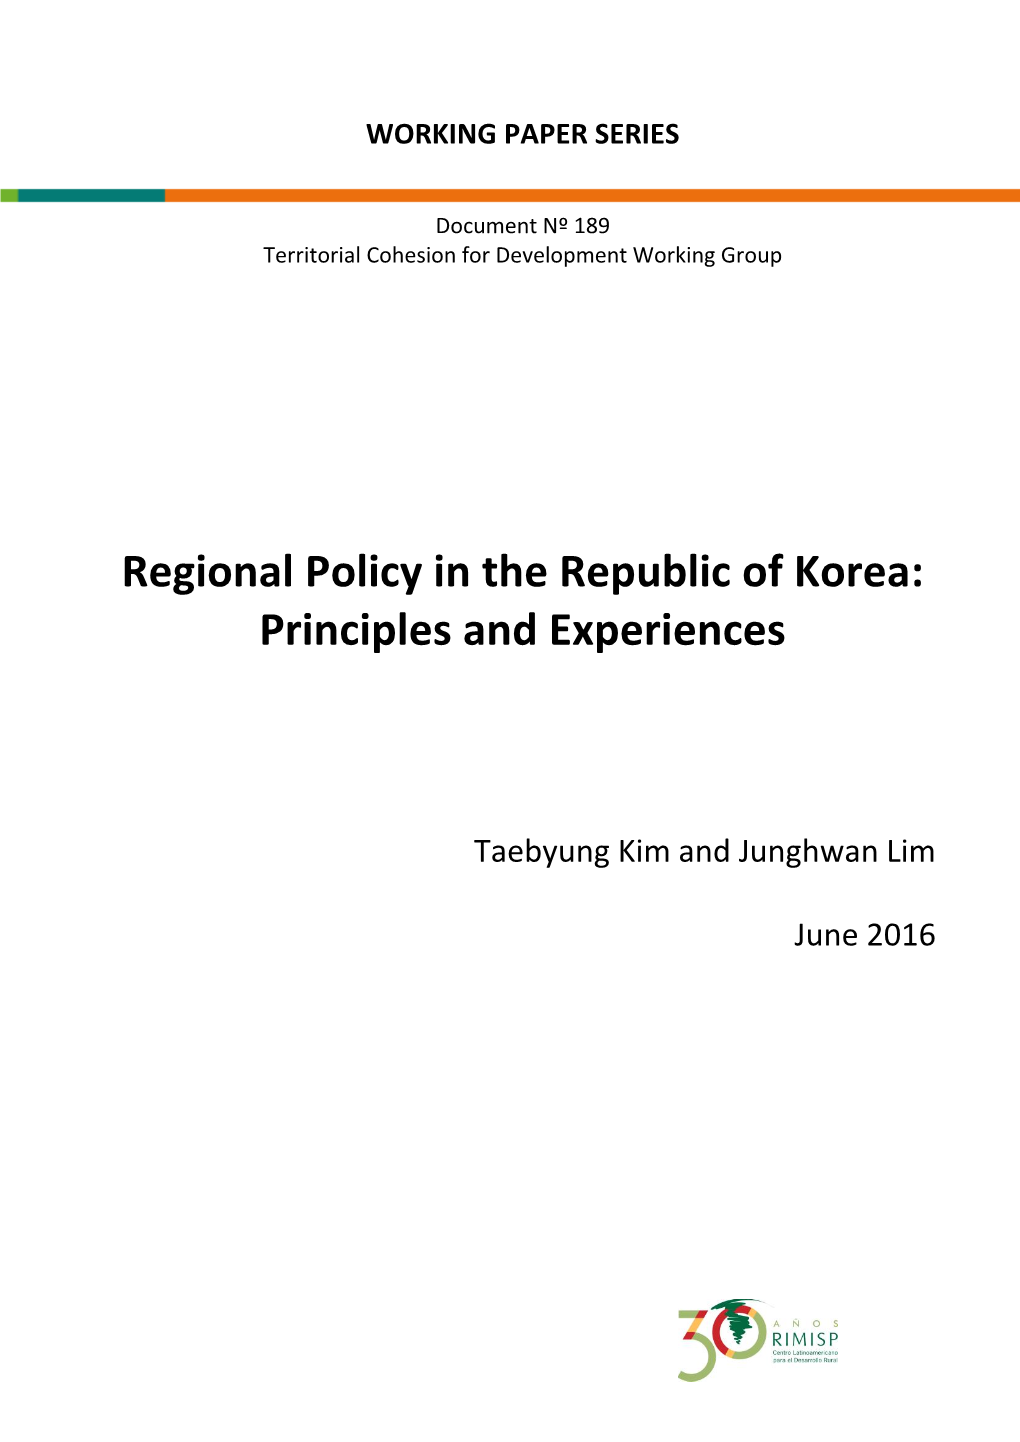 Regional Policy in the Republic of Korea: Principles and Experiences